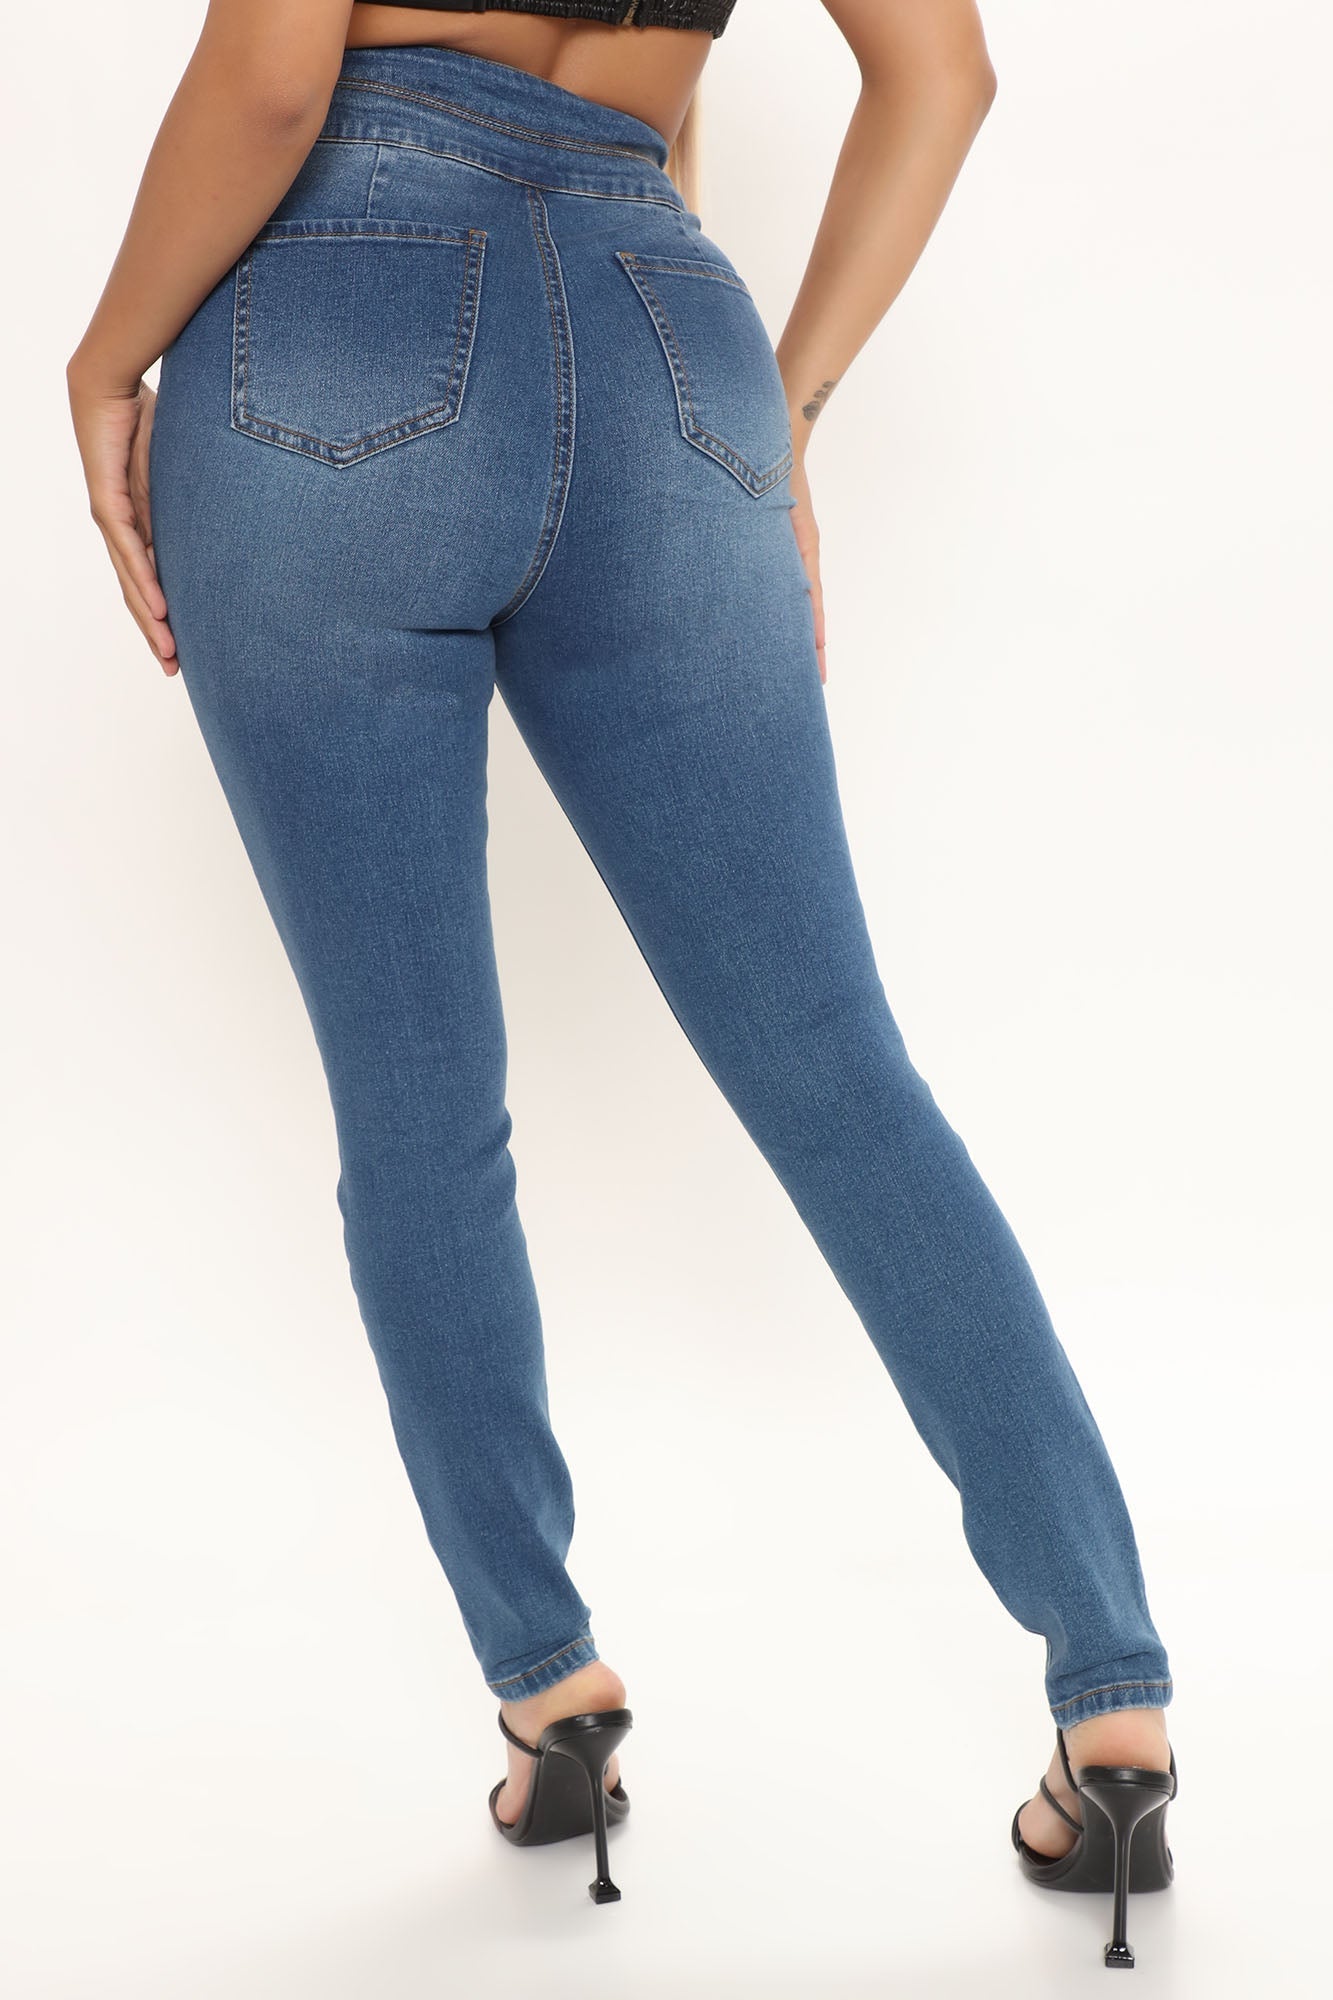 Lace Up To It Stretch Skinny Jeans - Medium Blue Wash